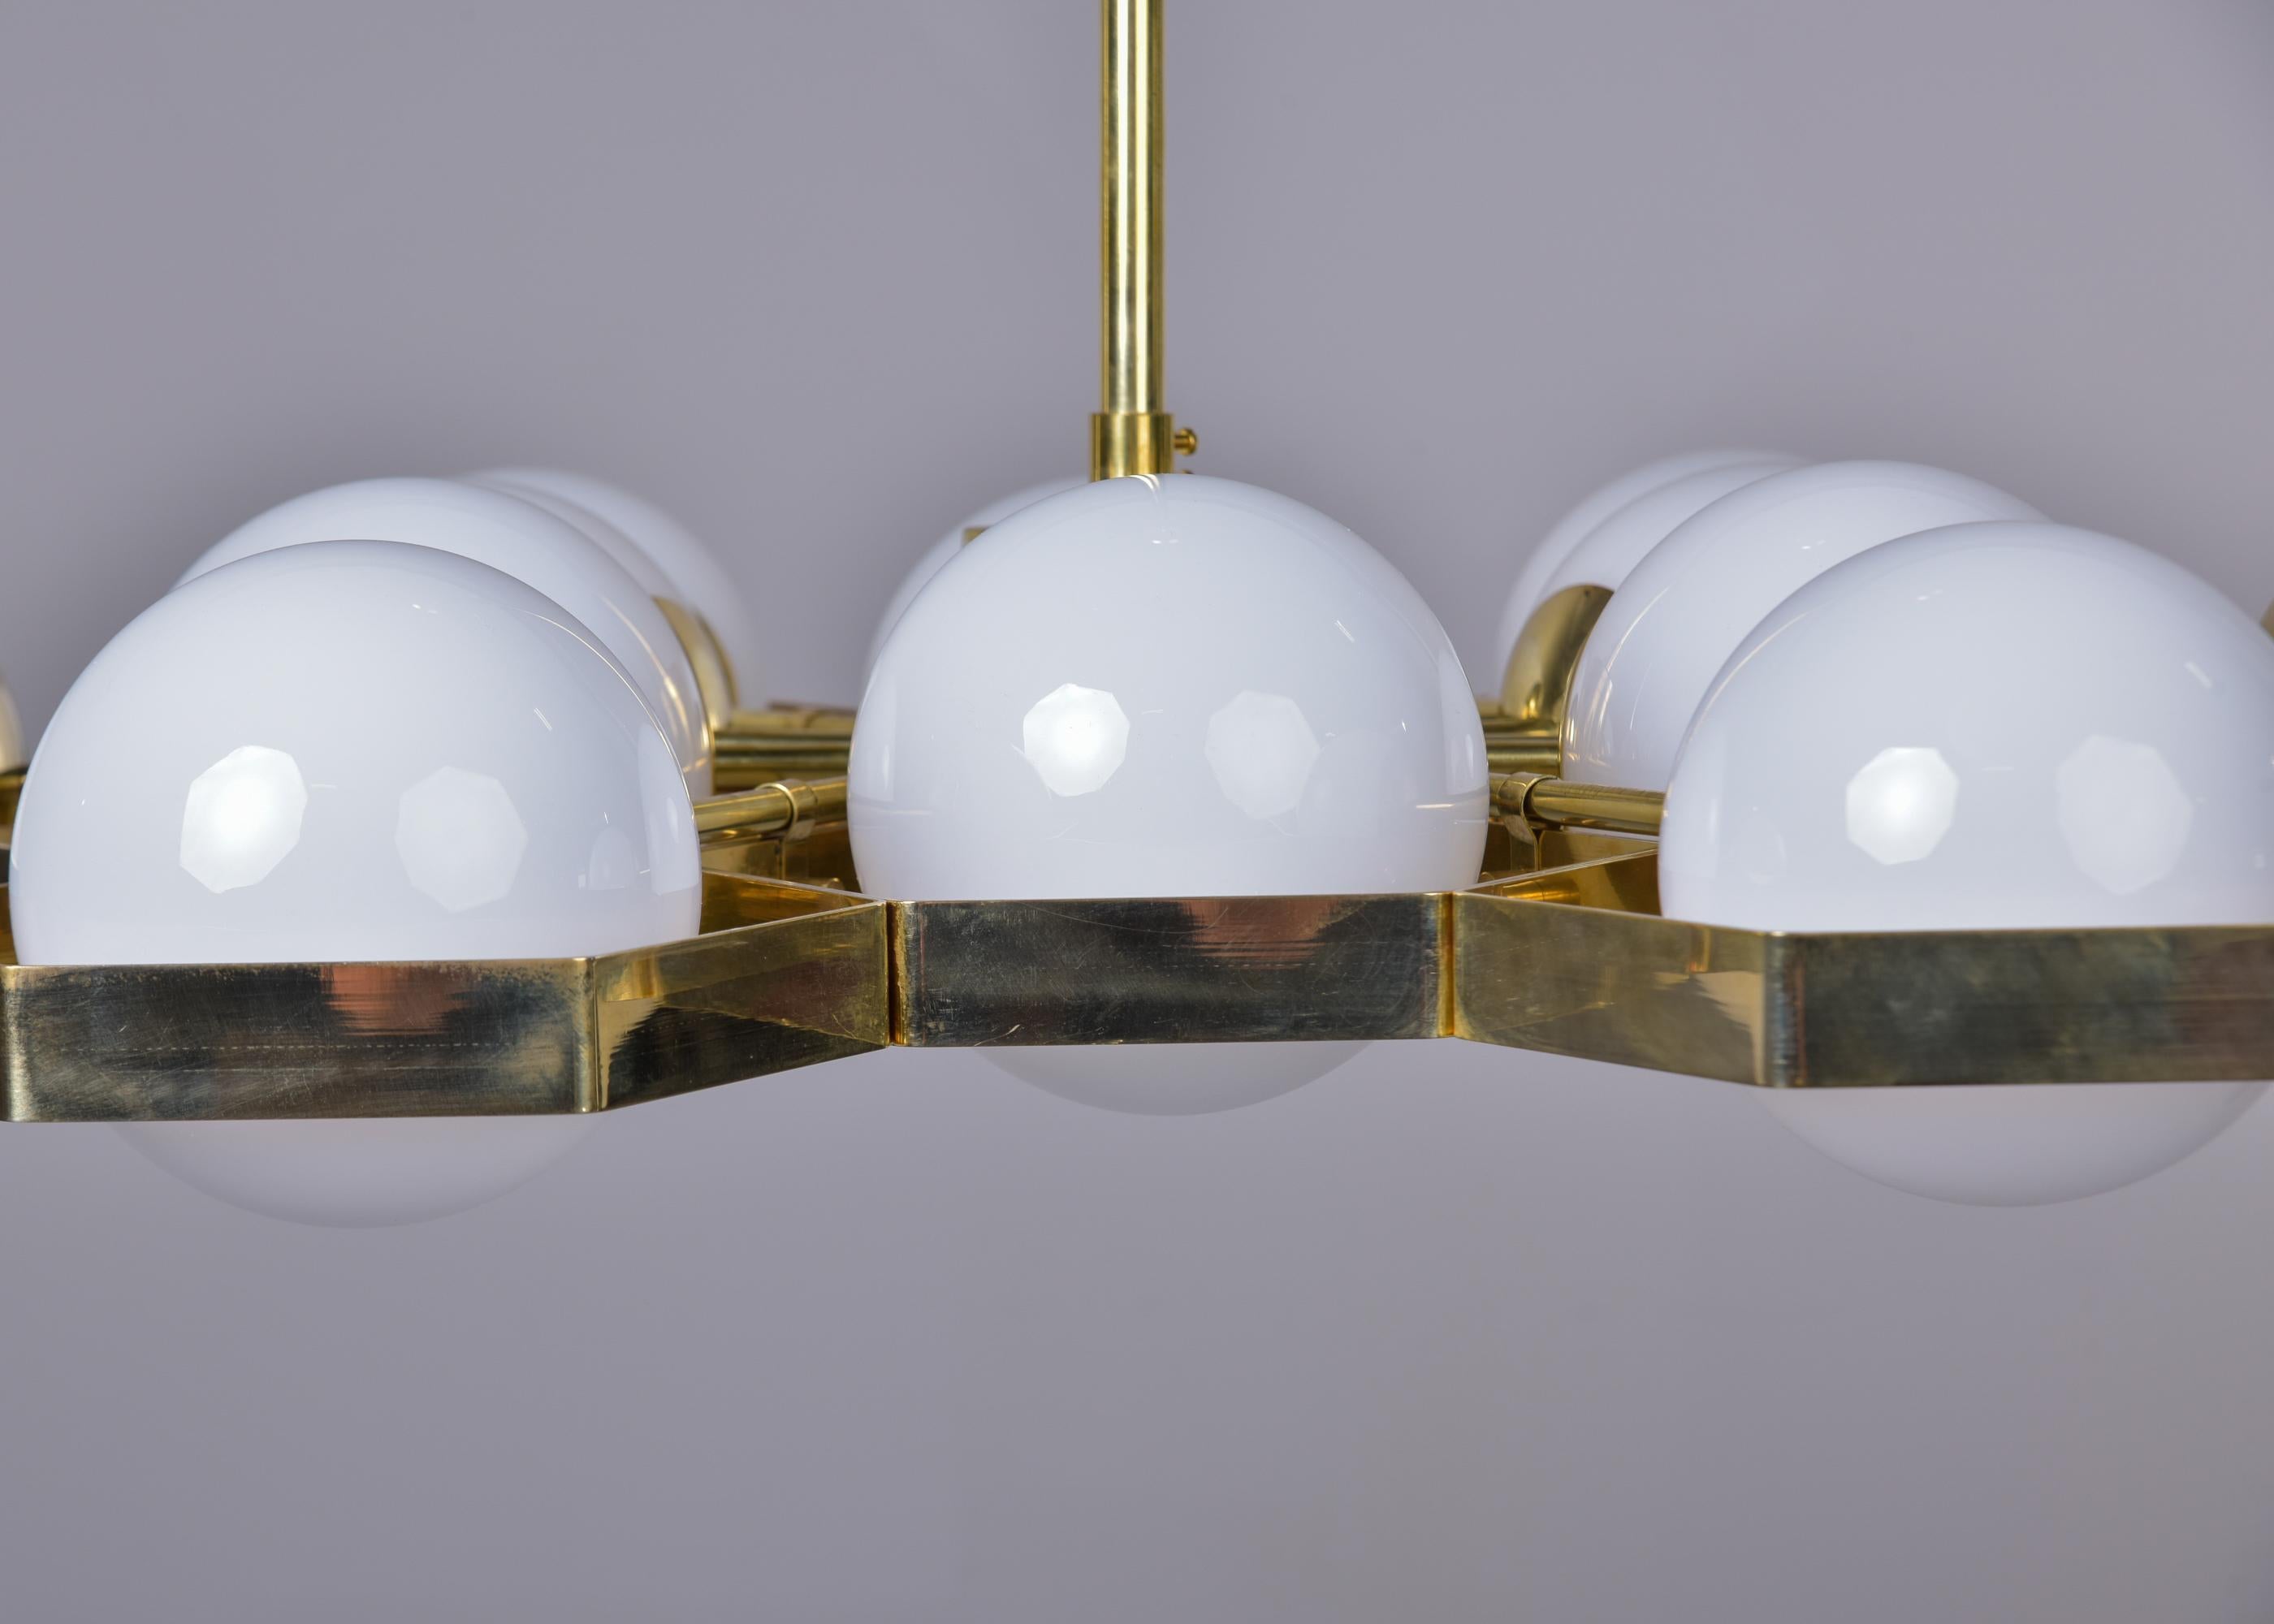 New 12 Light Italian Fixture with Honeycomb Brass Frame and White Globes  6